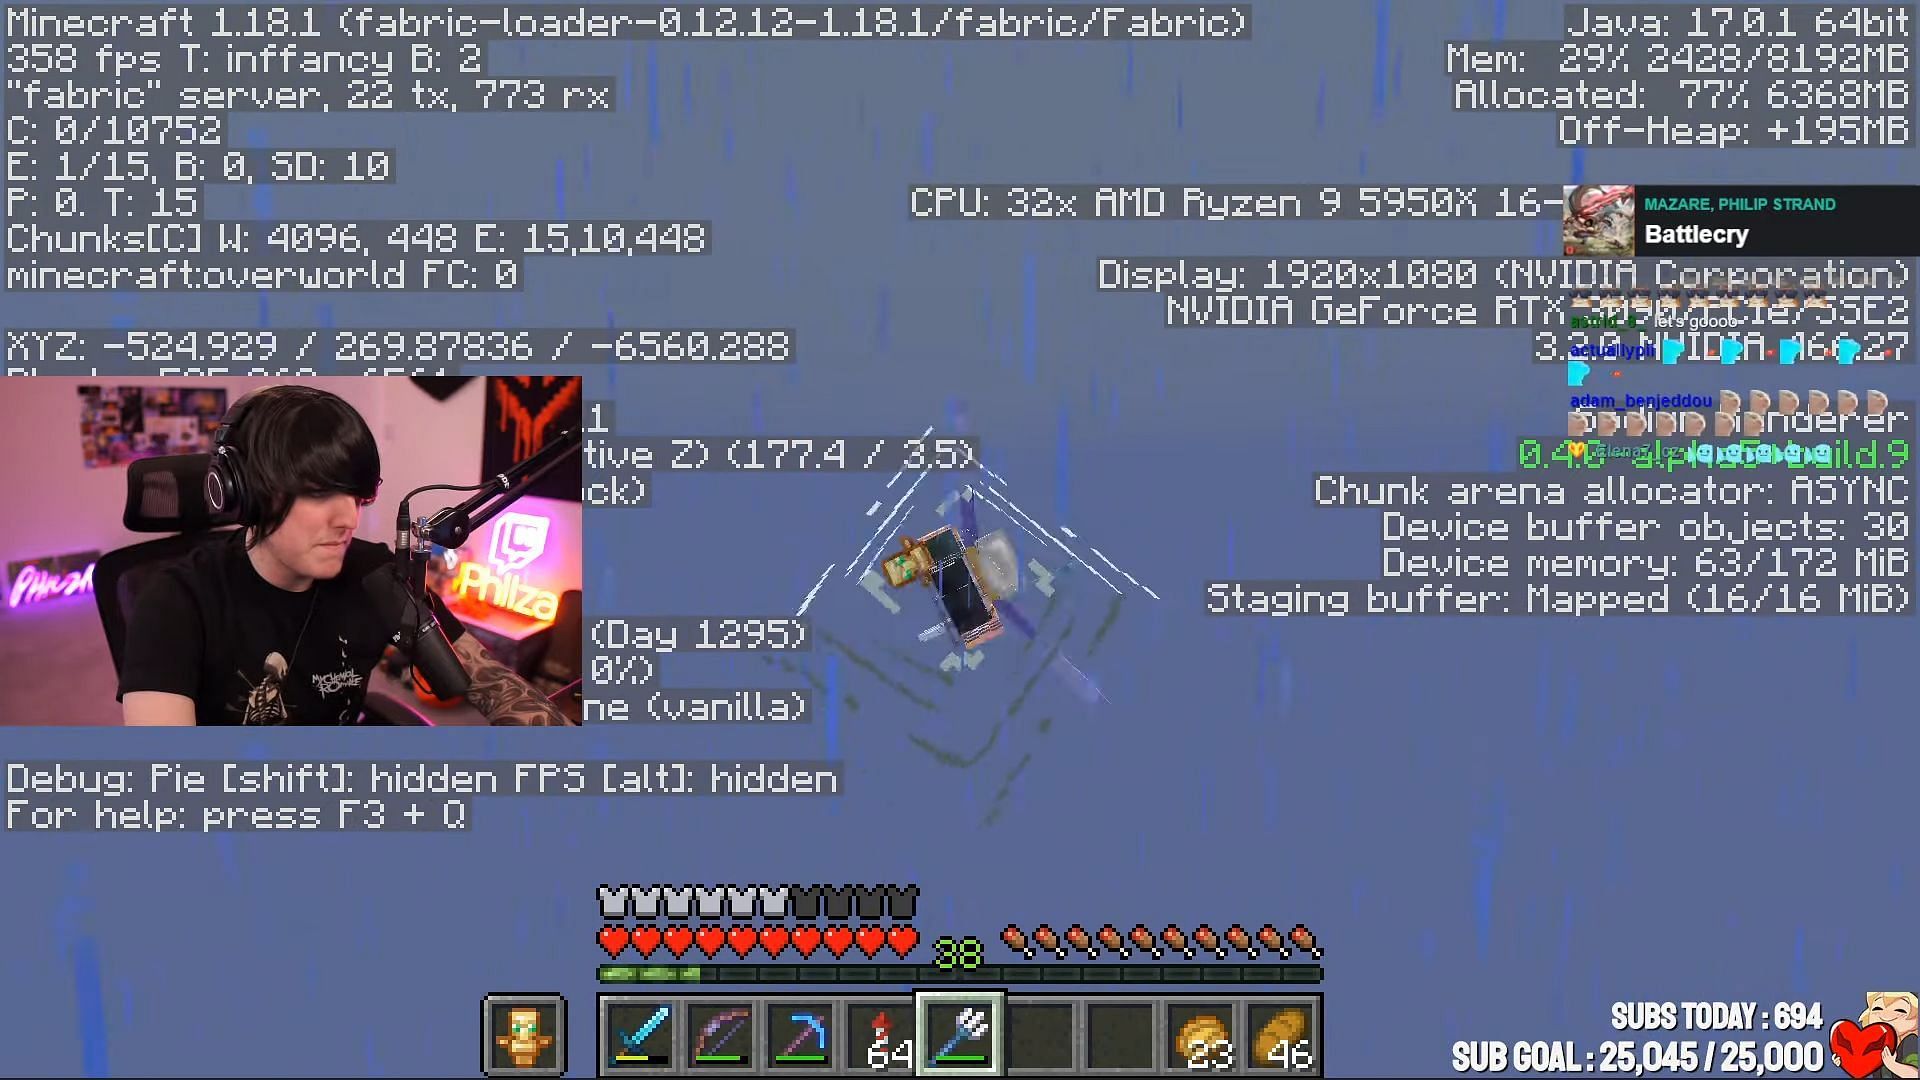 Chunks unable to load fast enough in the Minecraft server (Image via Ph1LzA/Twitch)